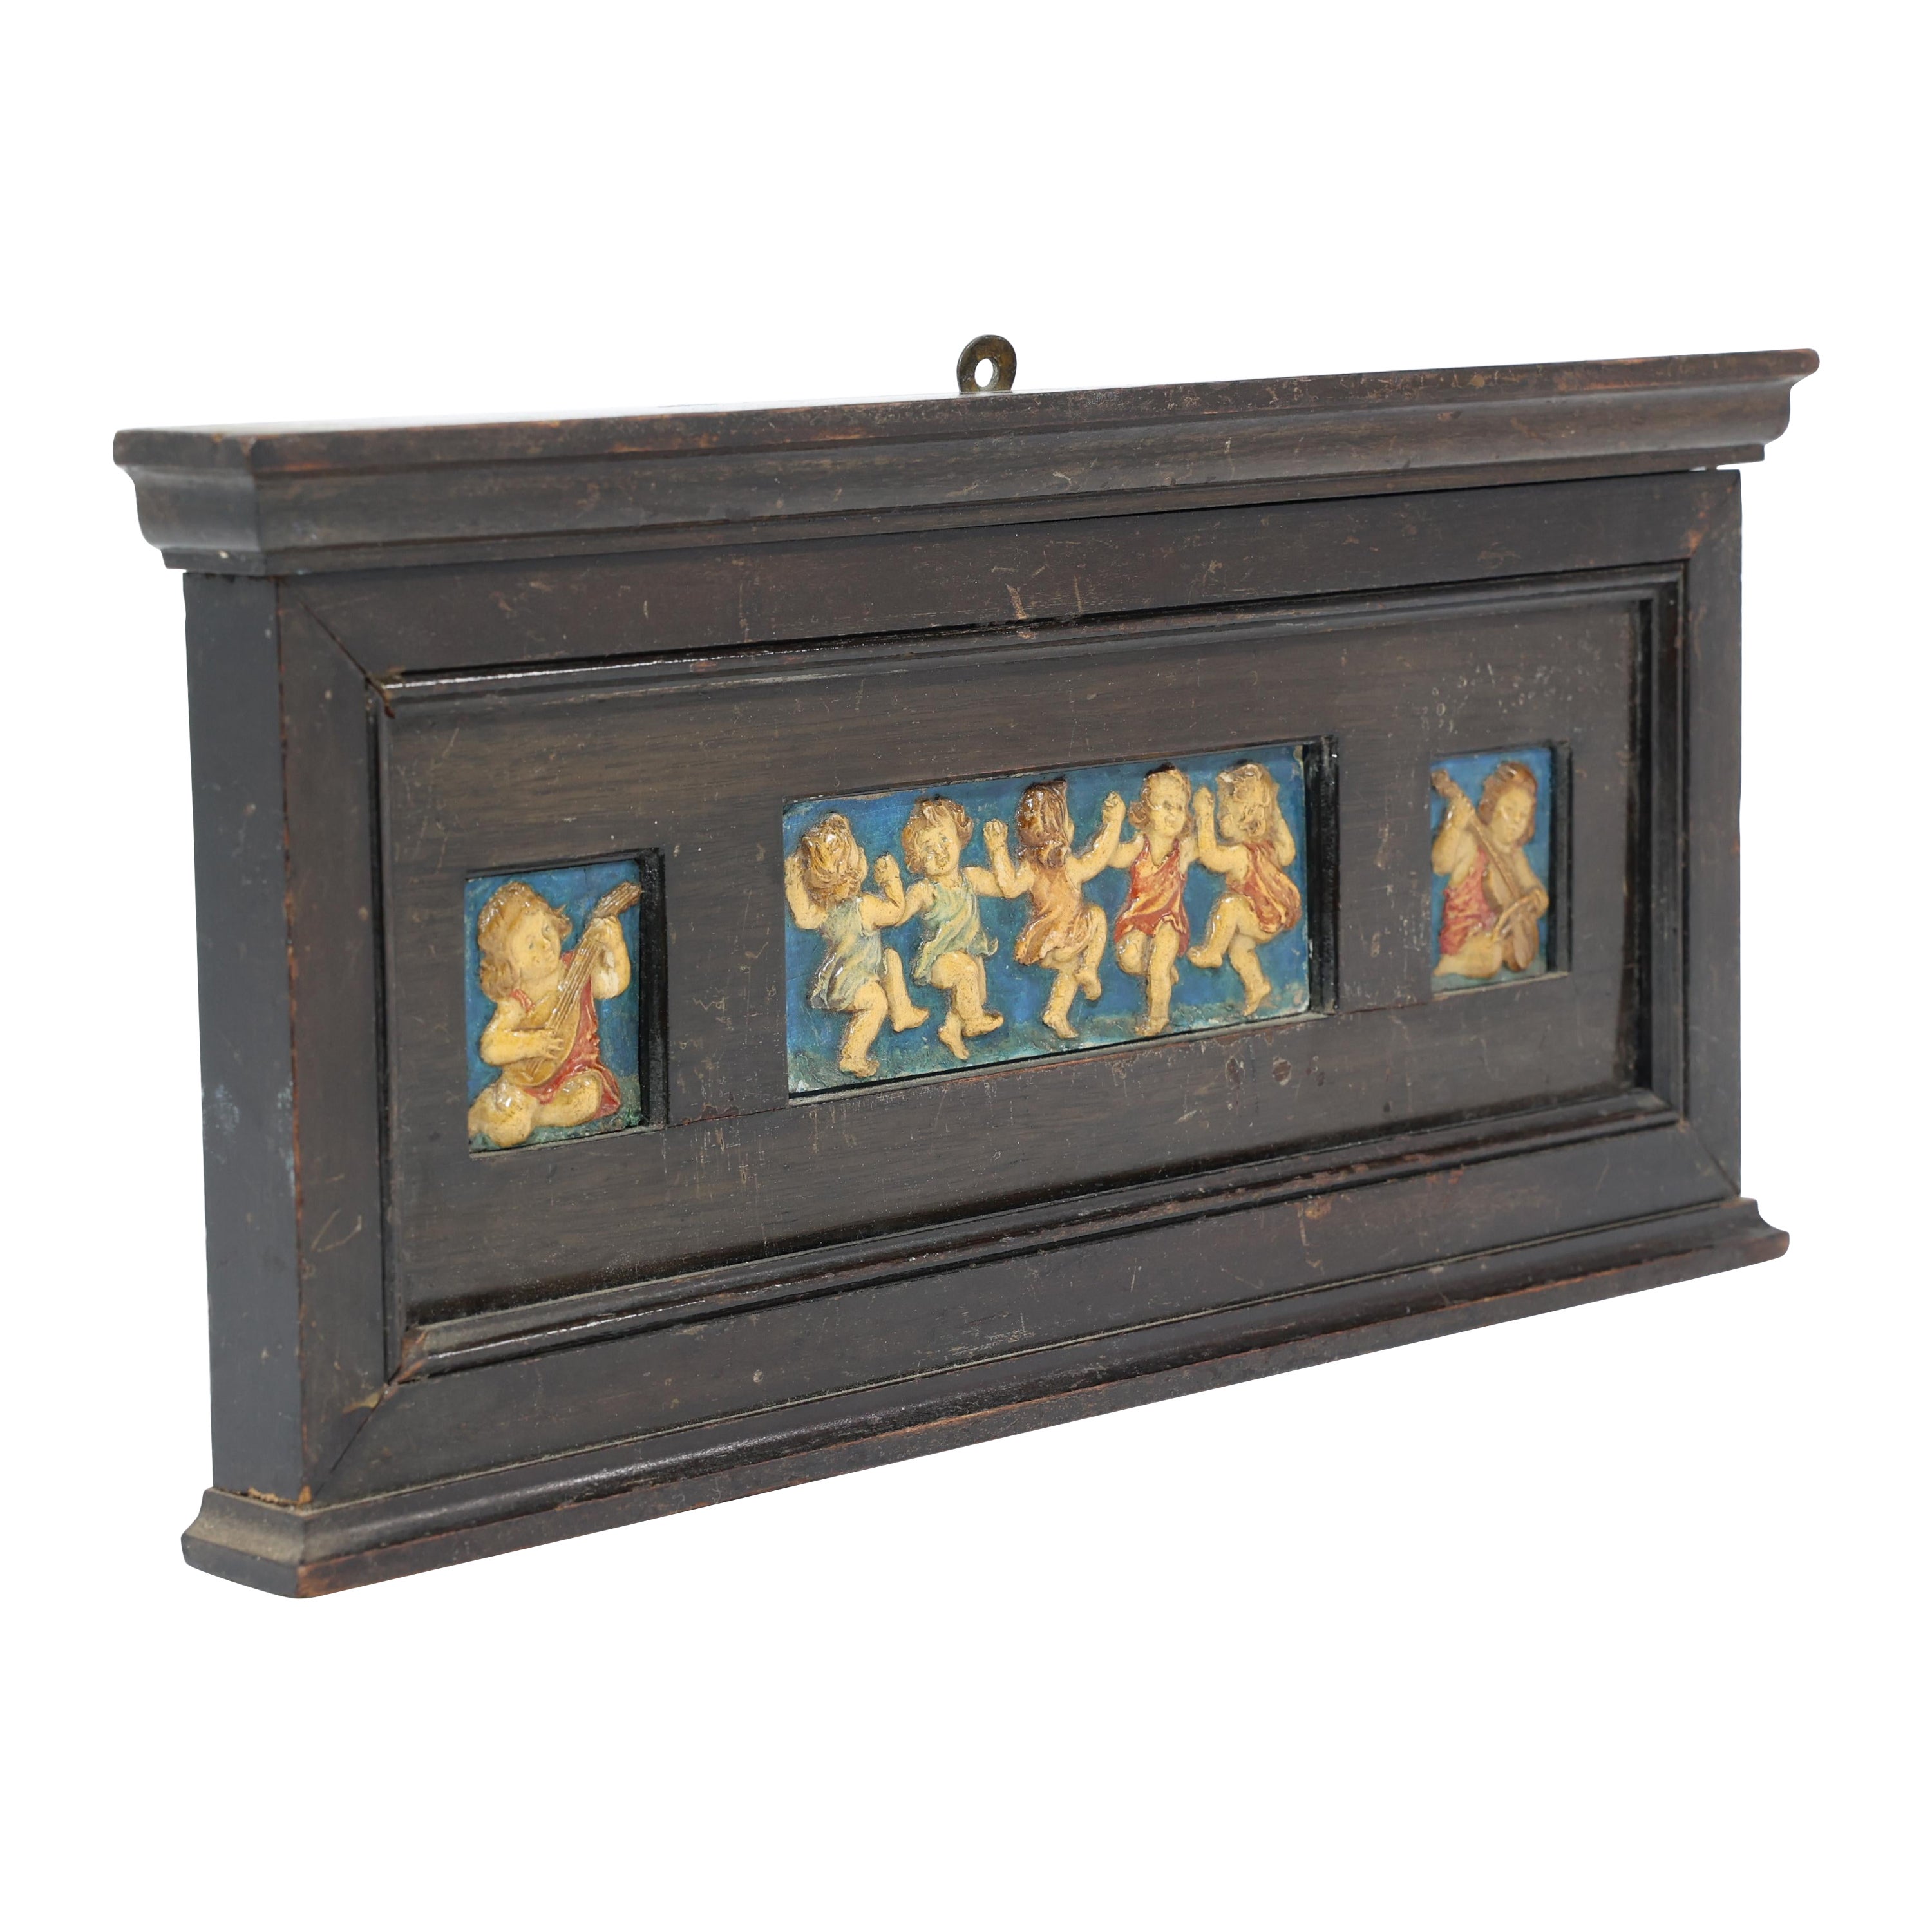 Ellen Mary Rope for Della Robbia Pottery. A small picture frame with three plaster plaques in their original ebonized frame. Depicting a child playing the Lute to the left-hand plaque, dancing children to the centre plaque, and a child playing the